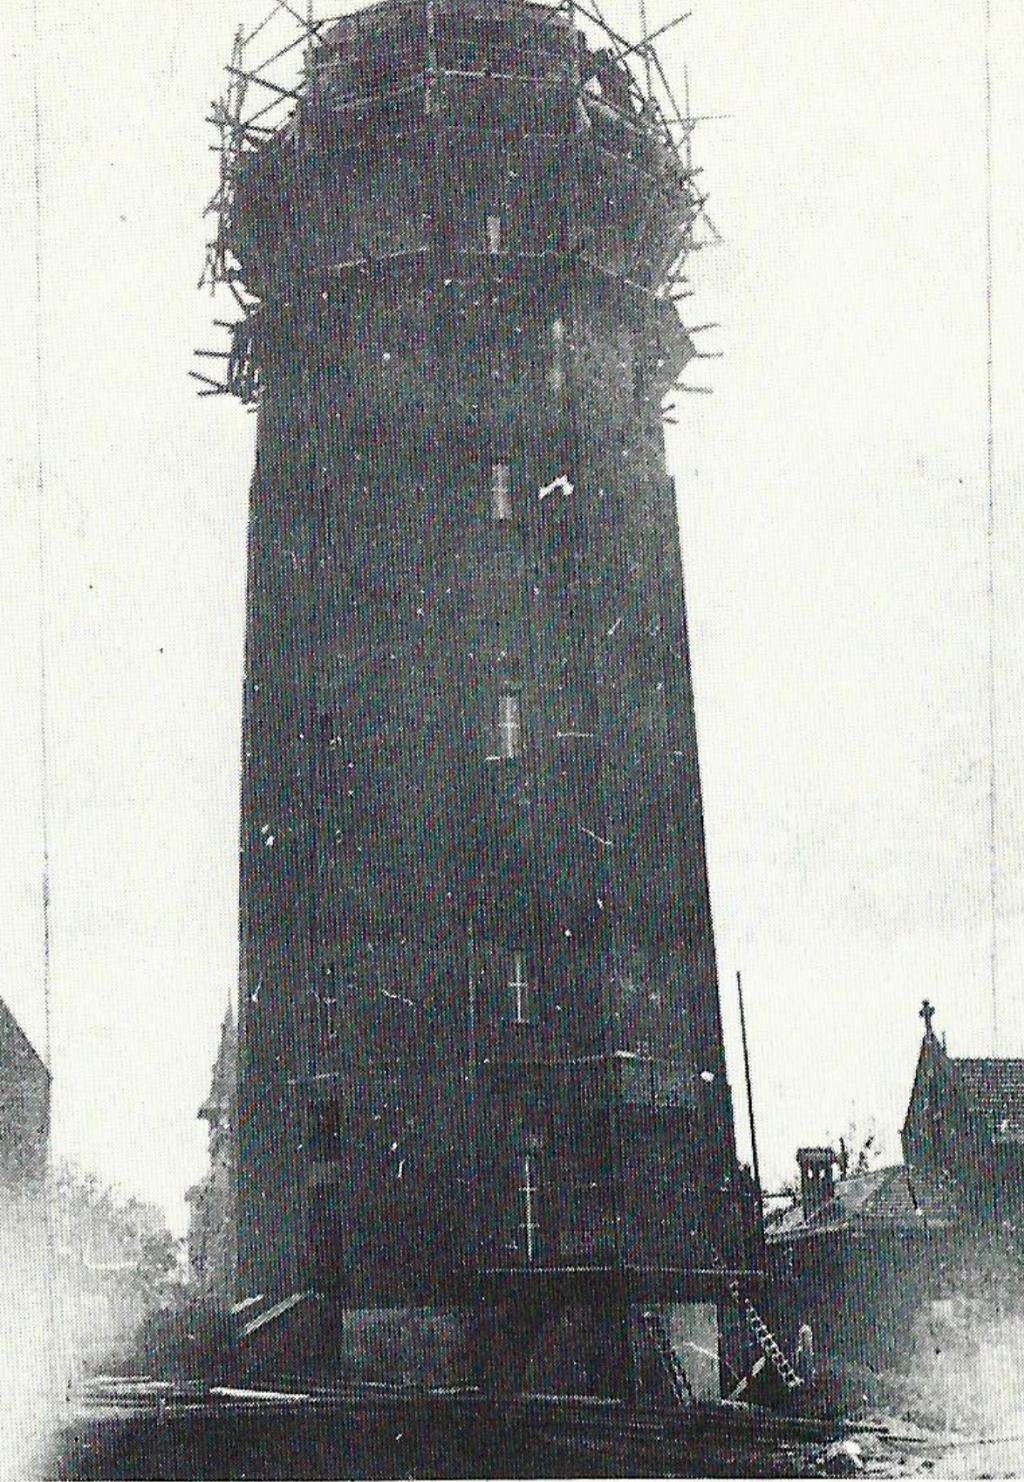 Construction of the water tower